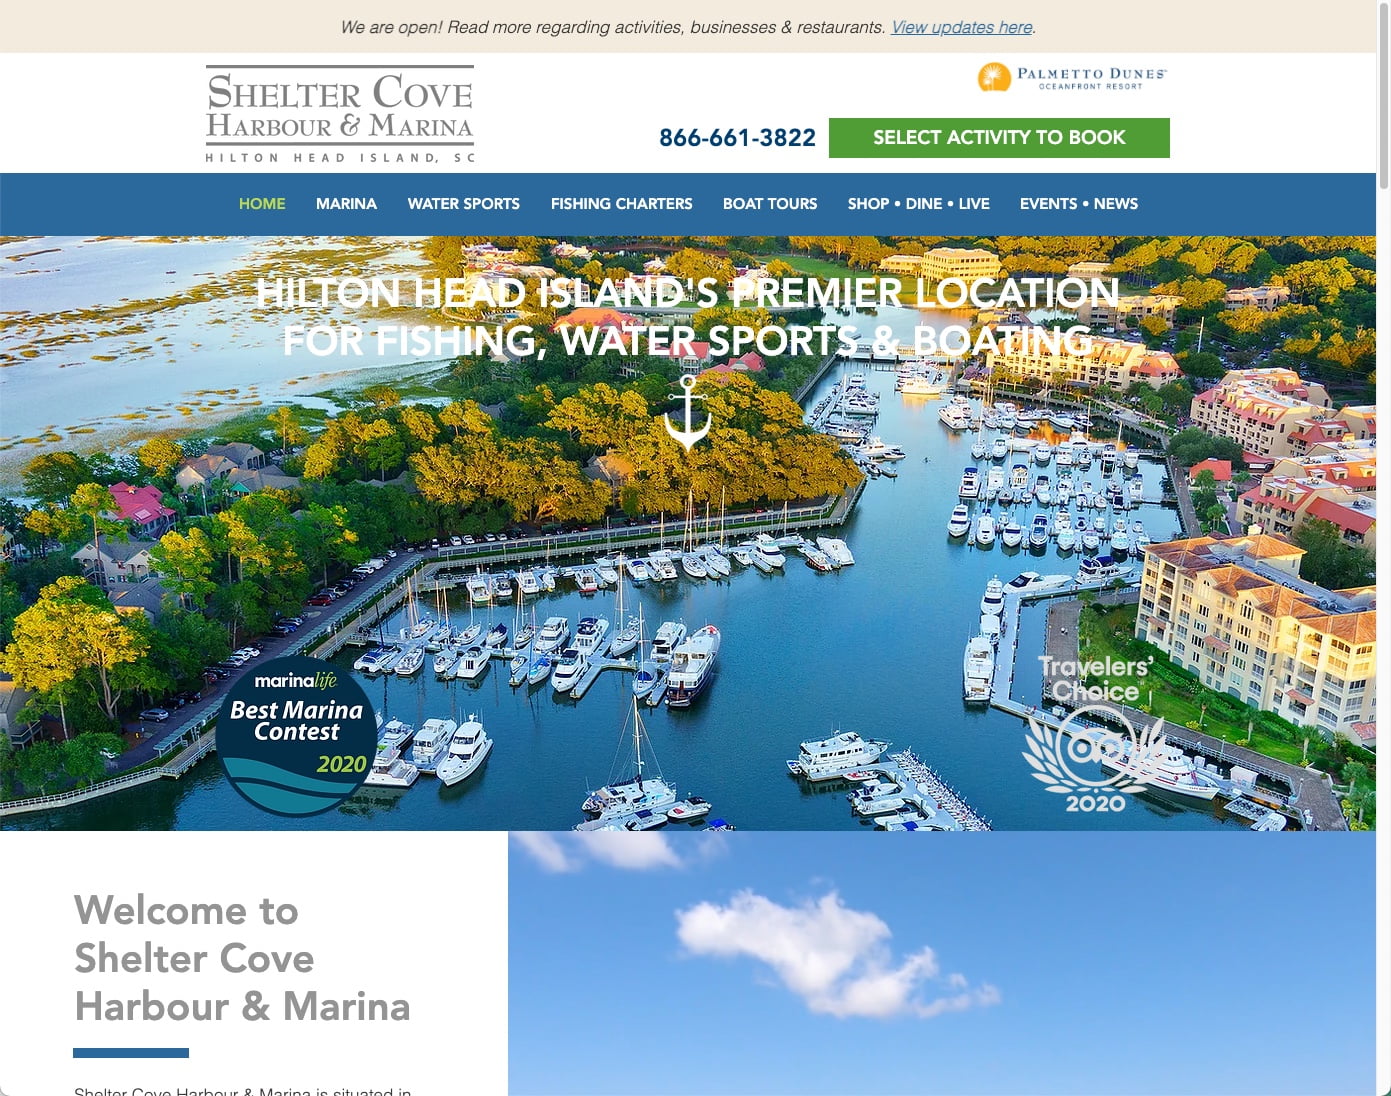 Shelter Cove Harbour & Marina at Palmetto Dunes